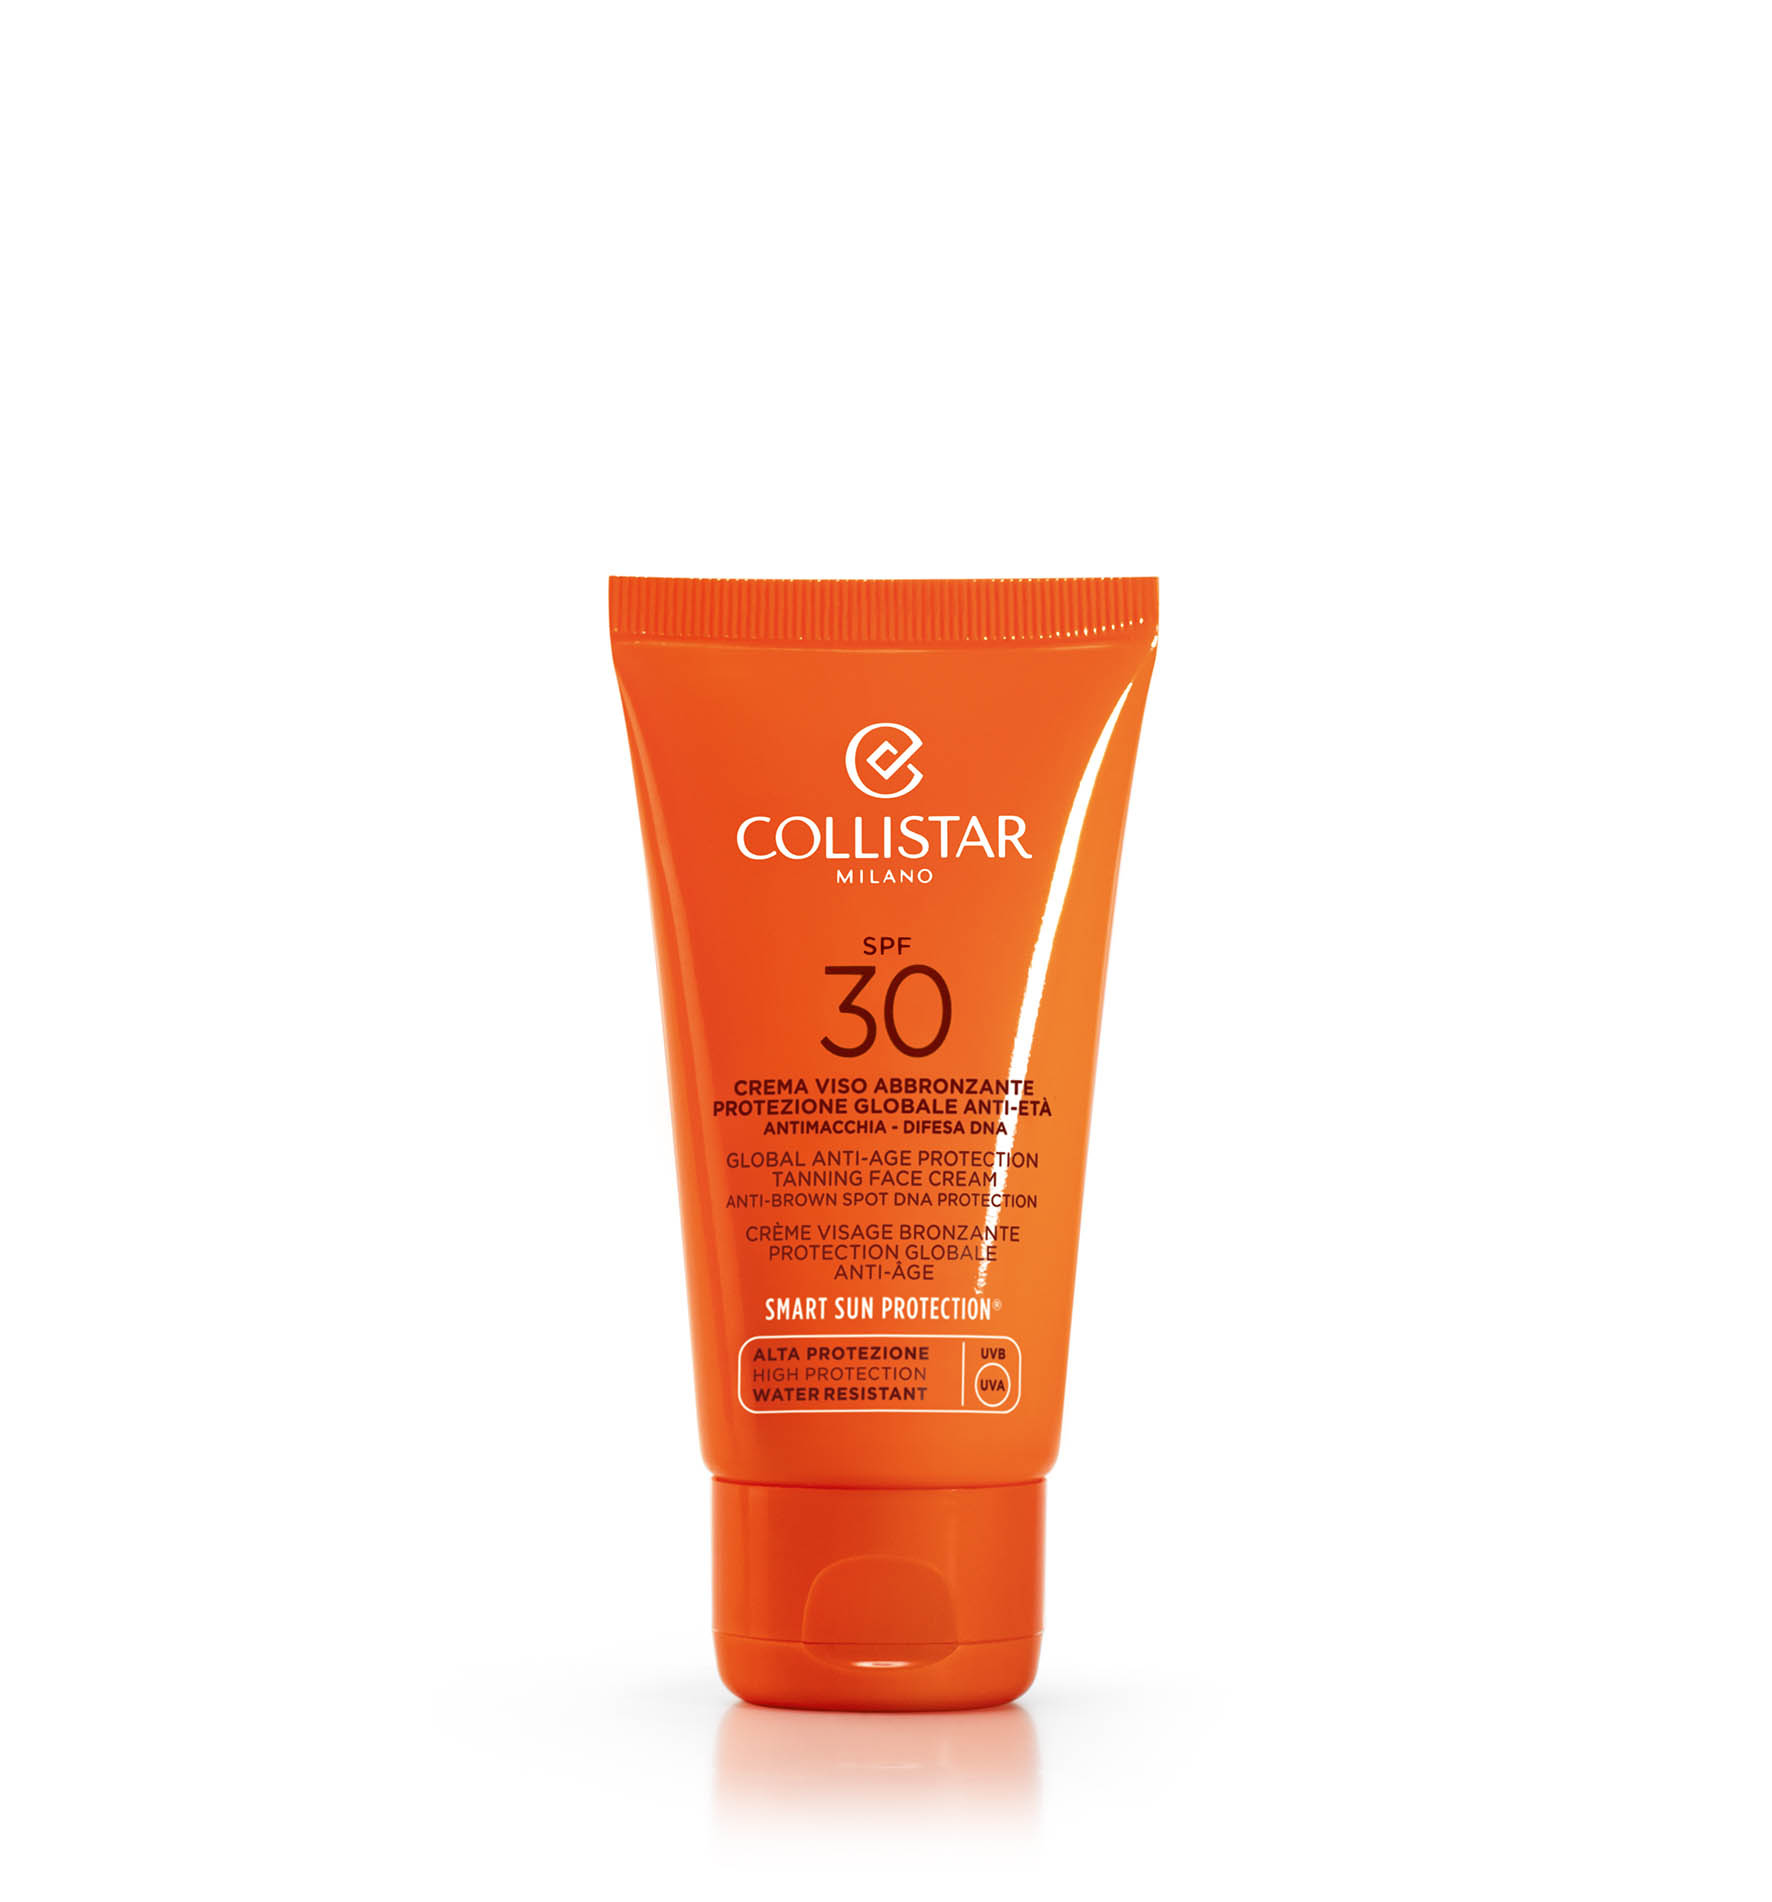 GLOBAL ANTI-AGE PROTECTION TANNING FACE CREAM SPF30 - High Protection SPF 30-50+ | Collistar - Shop Online Ufficiale